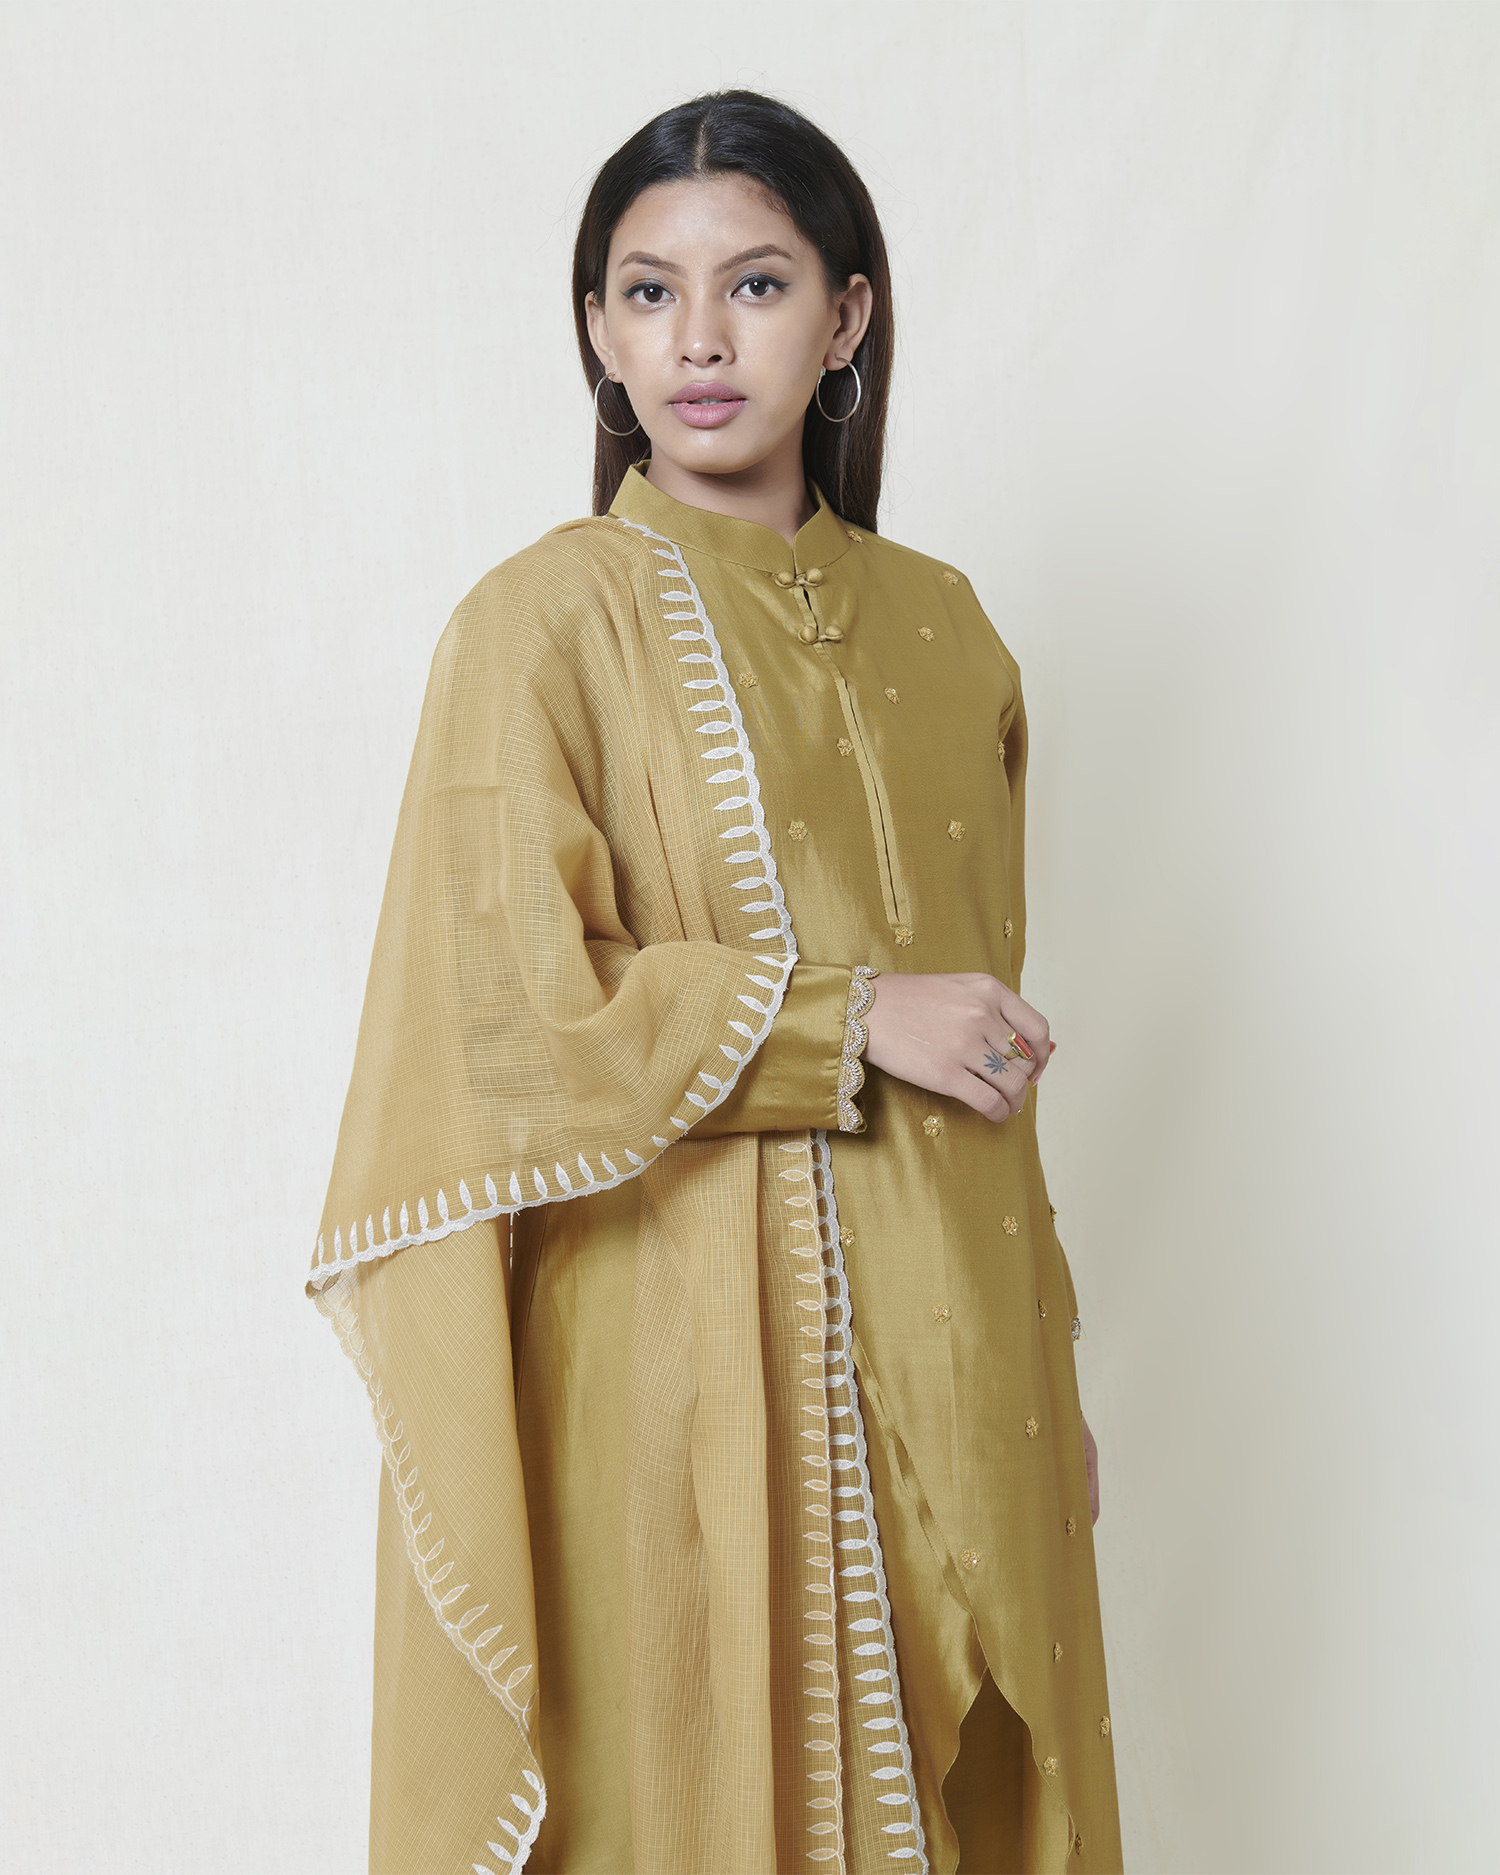 Light olive chanderi kurta with hand embroidery butis and zardozi cuffs complemented with silver kanchi tissue applique and cutwork detail kota dupatta.